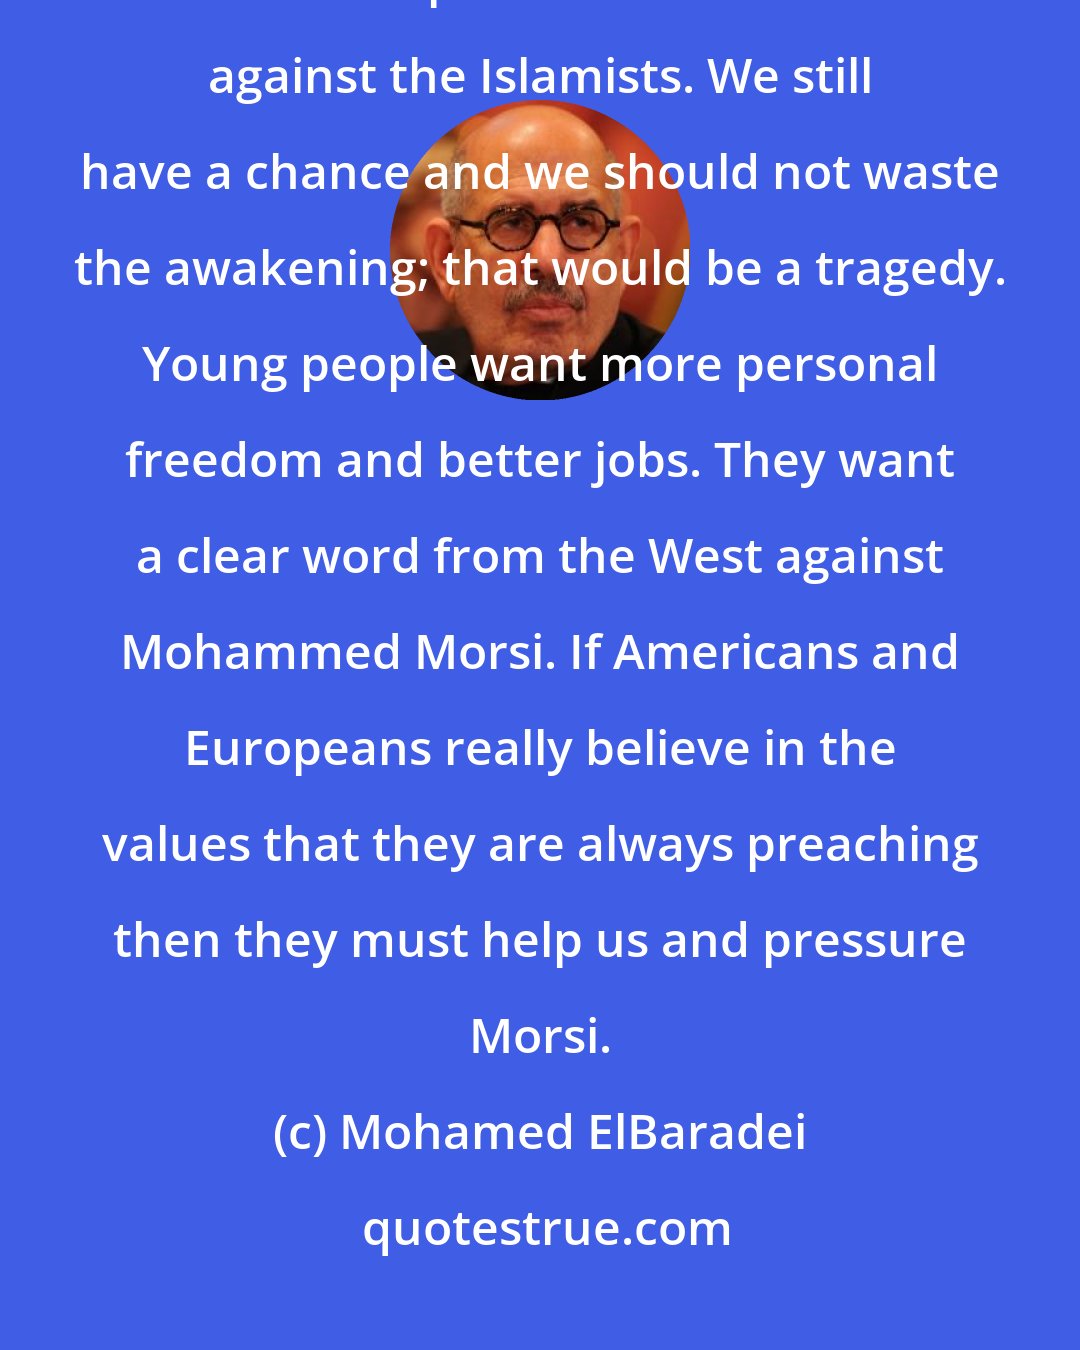 Mohamed ElBaradei: In April I founded the Constitution Party. With the Social Democrats and all liberal powers we will combine against the Islamists. We still have a chance and we should not waste the awakening; that would be a tragedy. Young people want more personal freedom and better jobs. They want a clear word from the West against Mohammed Morsi. If Americans and Europeans really believe in the values that they are always preaching then they must help us and pressure Morsi.